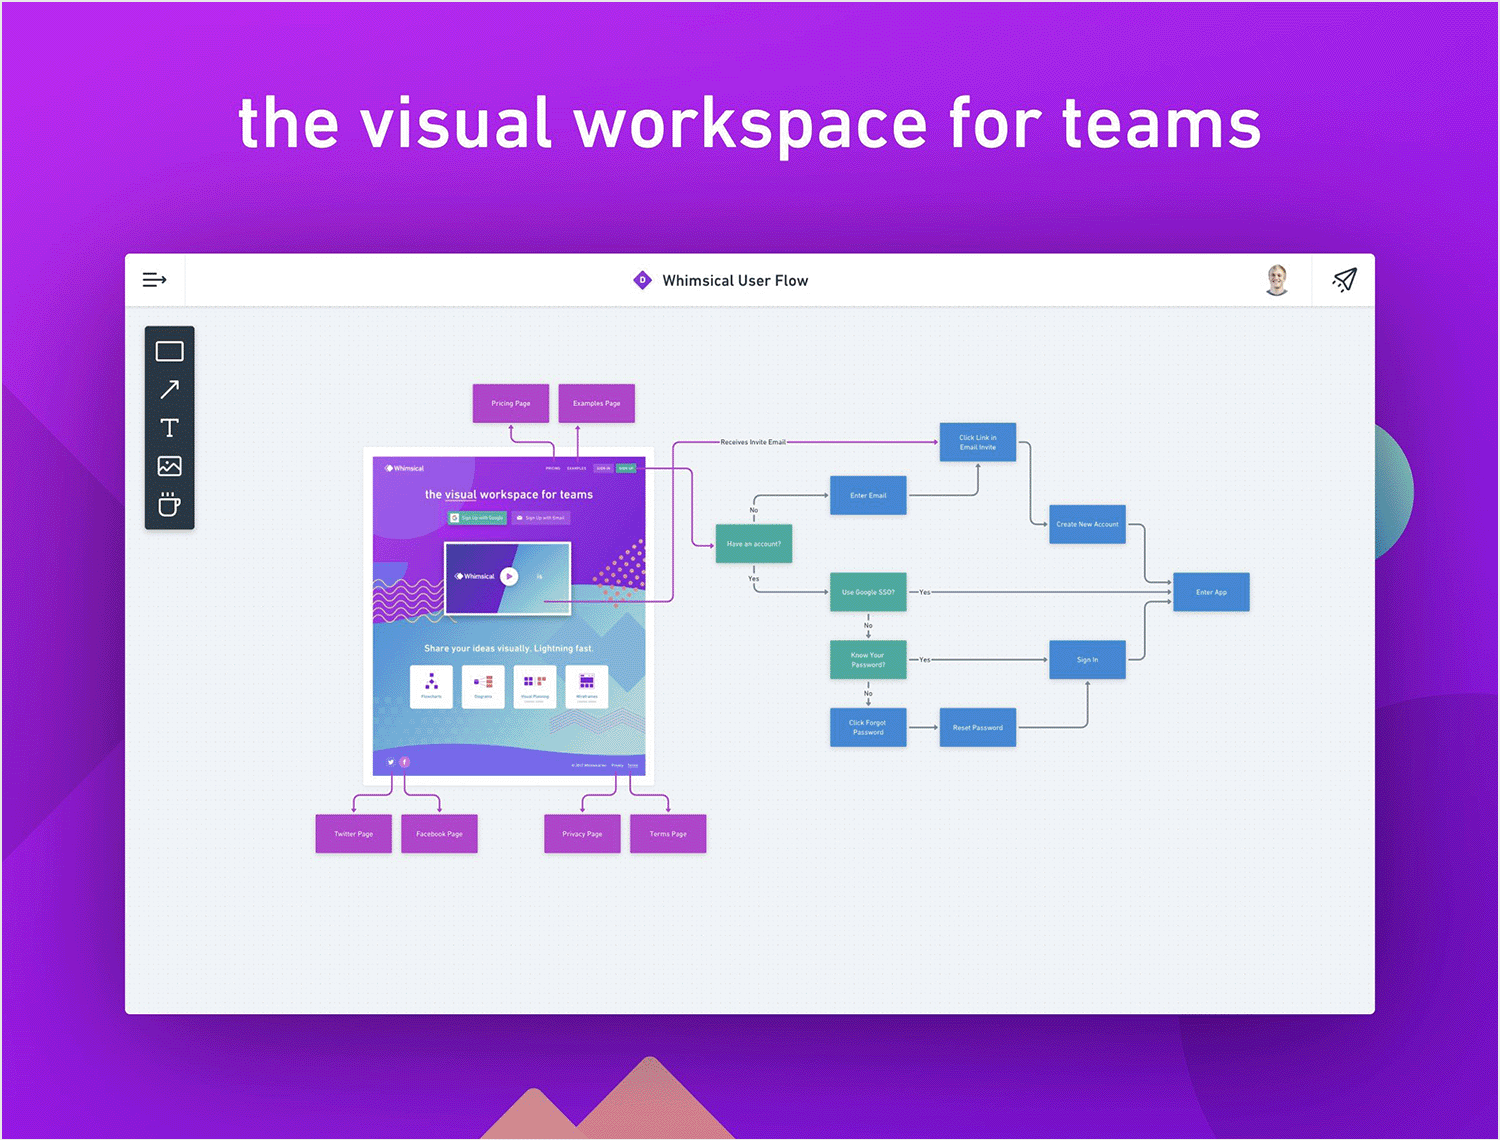 Whimsical user flow diagram showcasing a visual workspace for teams with various user journey steps.